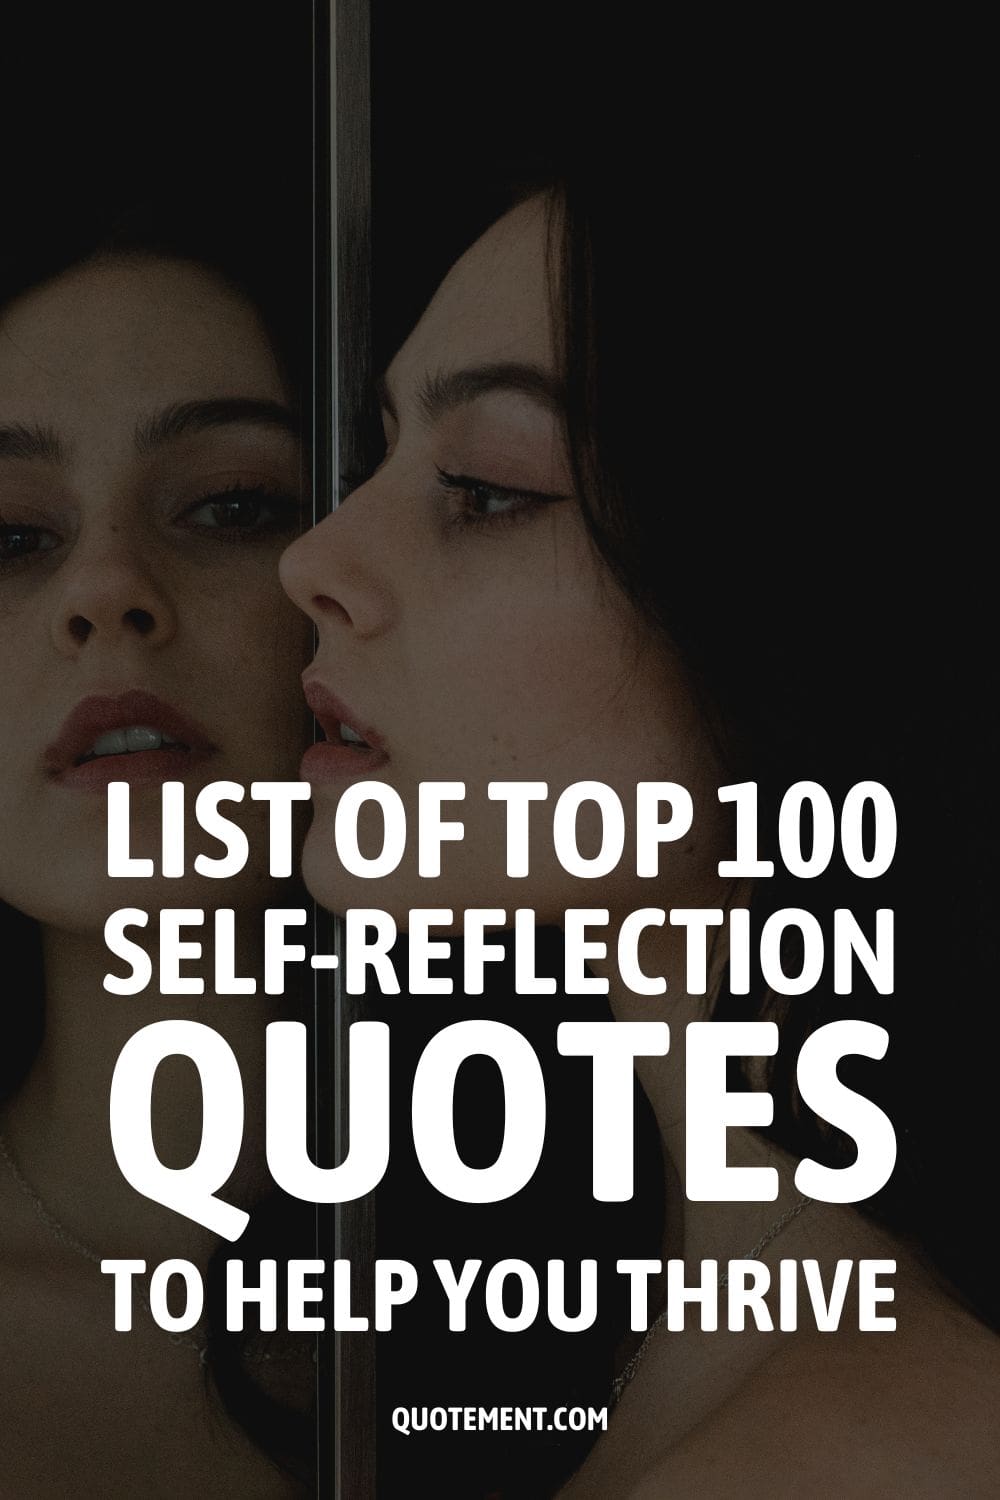 List Of Top 100 Self-Reflection Quotes To Help You Thrive
